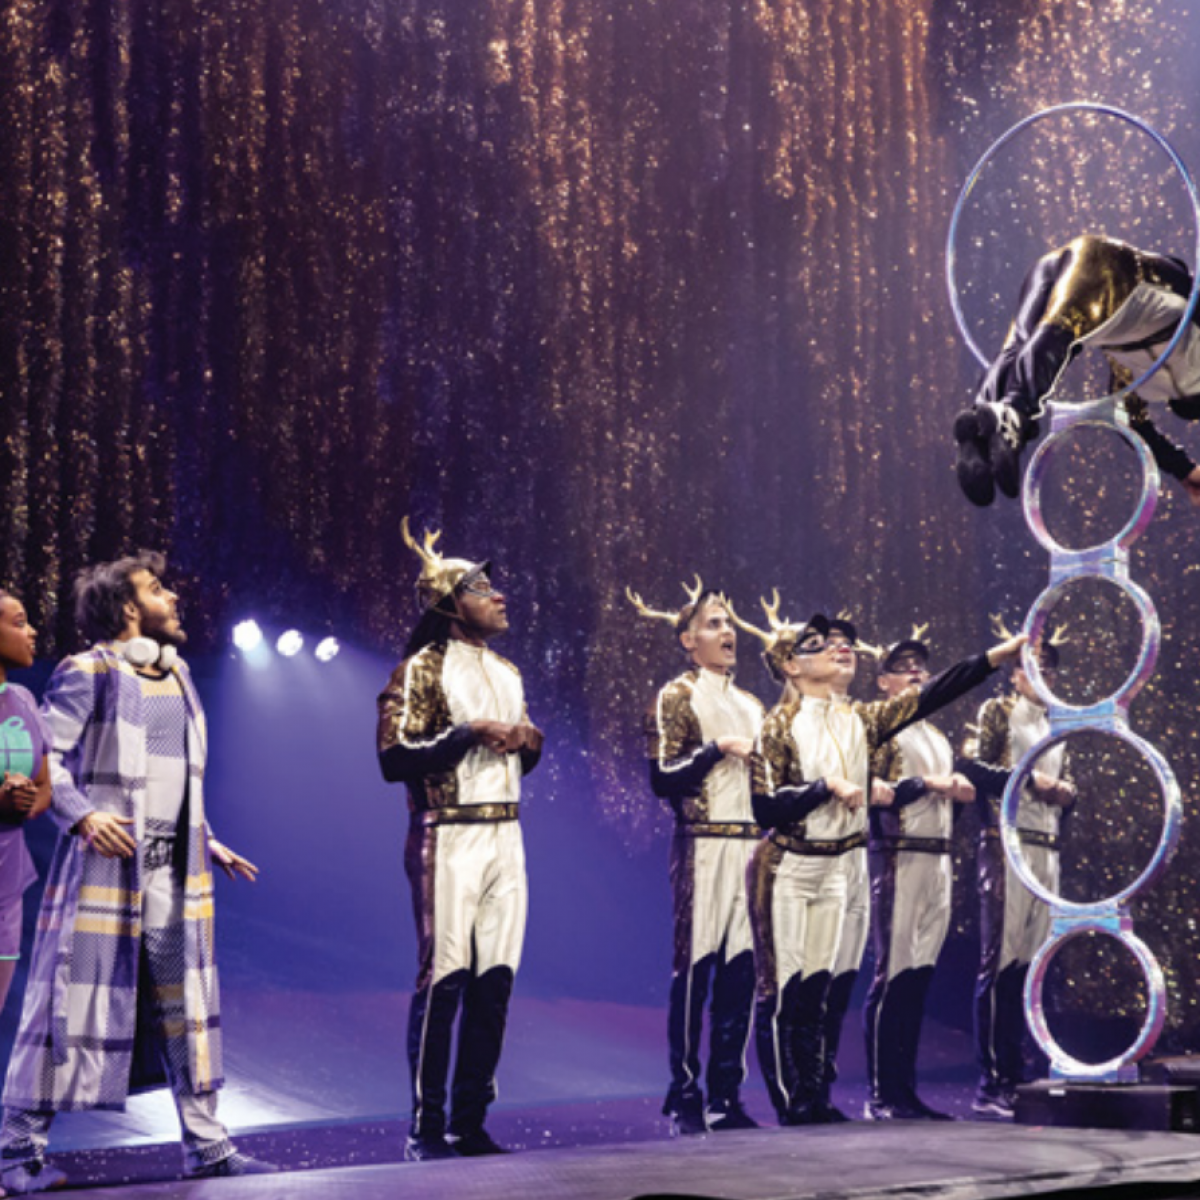 Cirque du Soleil's first Christmas show, 'Twas the Night Before,' to  take flight in Milwaukee ✨